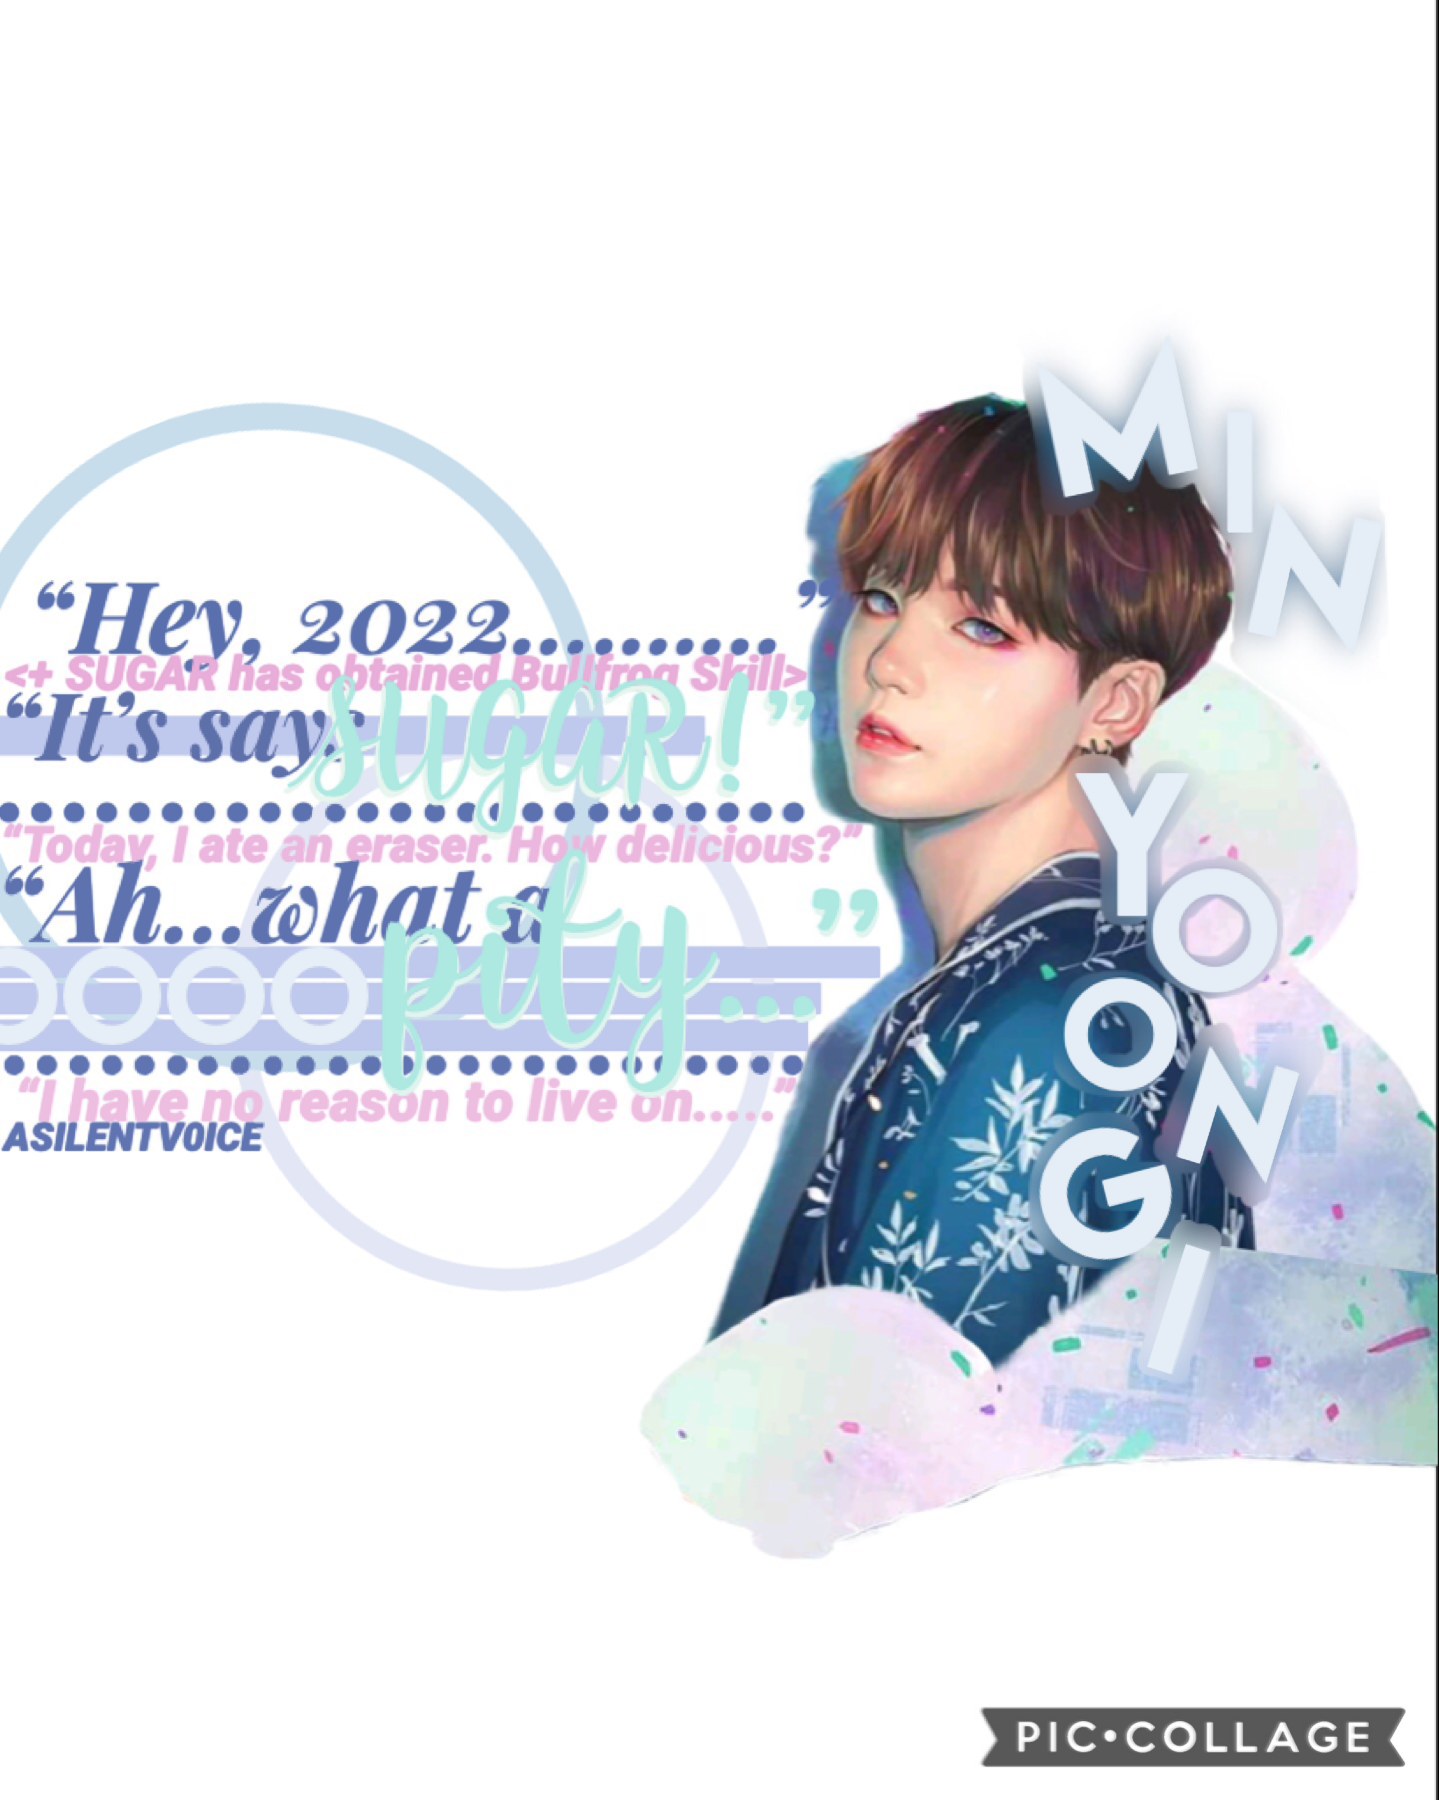 ᵀᴬᴾ ᴴᴱᴿᴱ


Hi! I apologize fr not posting on so long! 😅 I hope you like it, anyone whose bias is SUGA!

*By the way: yes, I saw that I accidentally said SUGAR instead of SUGA in one of the quotes, but once I saw it, it was already too late. Gosh darn it..